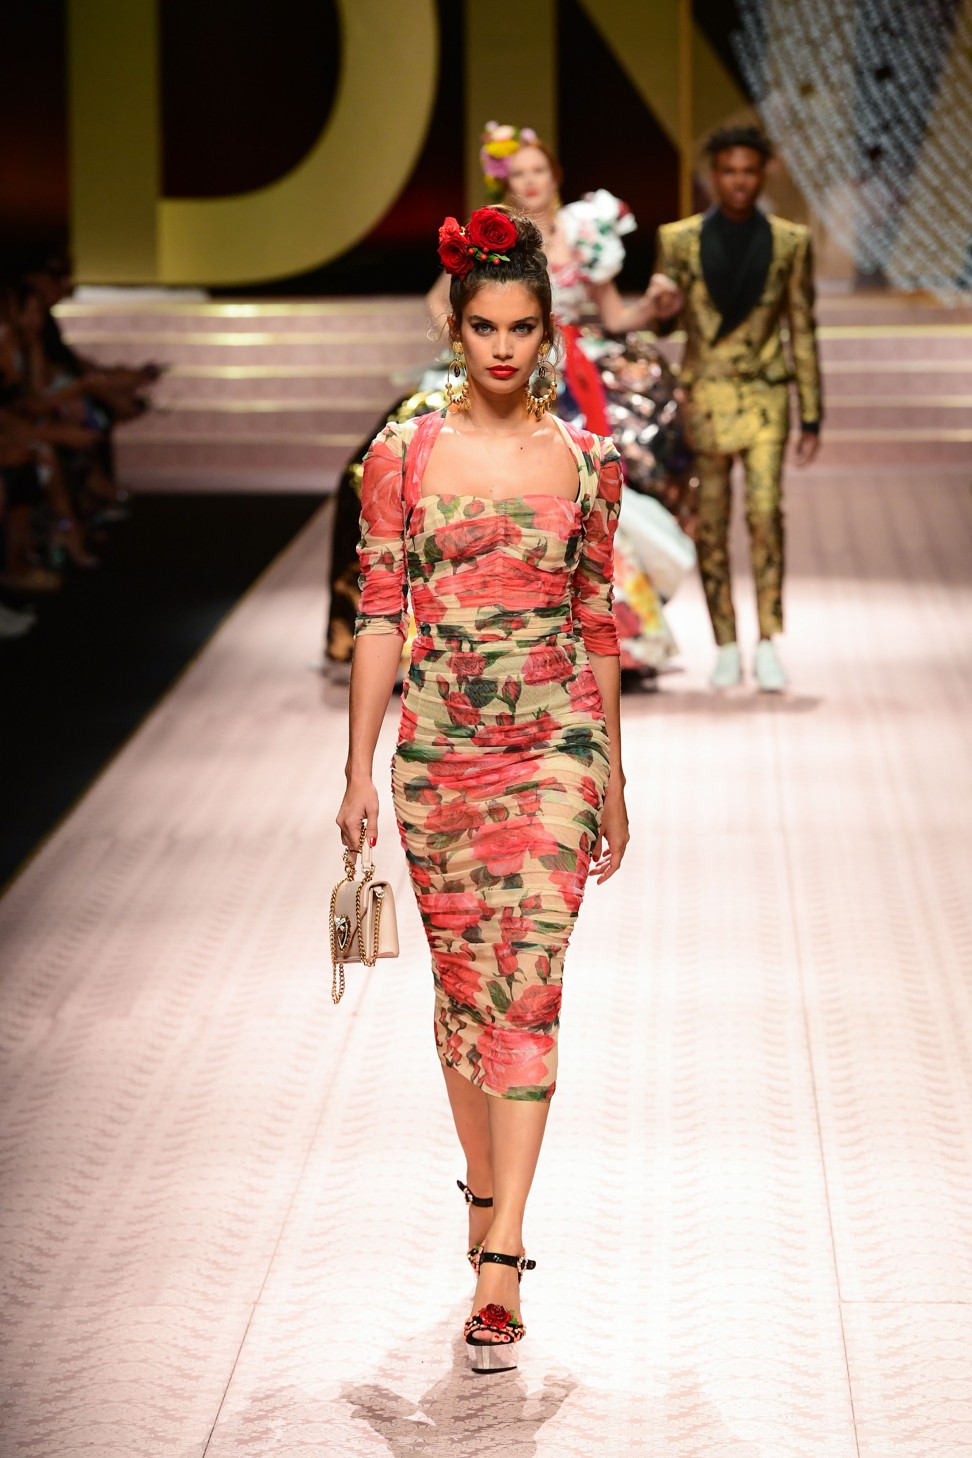 Portuguese model Sara Sampai was in the procession. Spring flowers featured as hair accessories and as prints and embellishment on long ruffled dresses. Photo: AFP